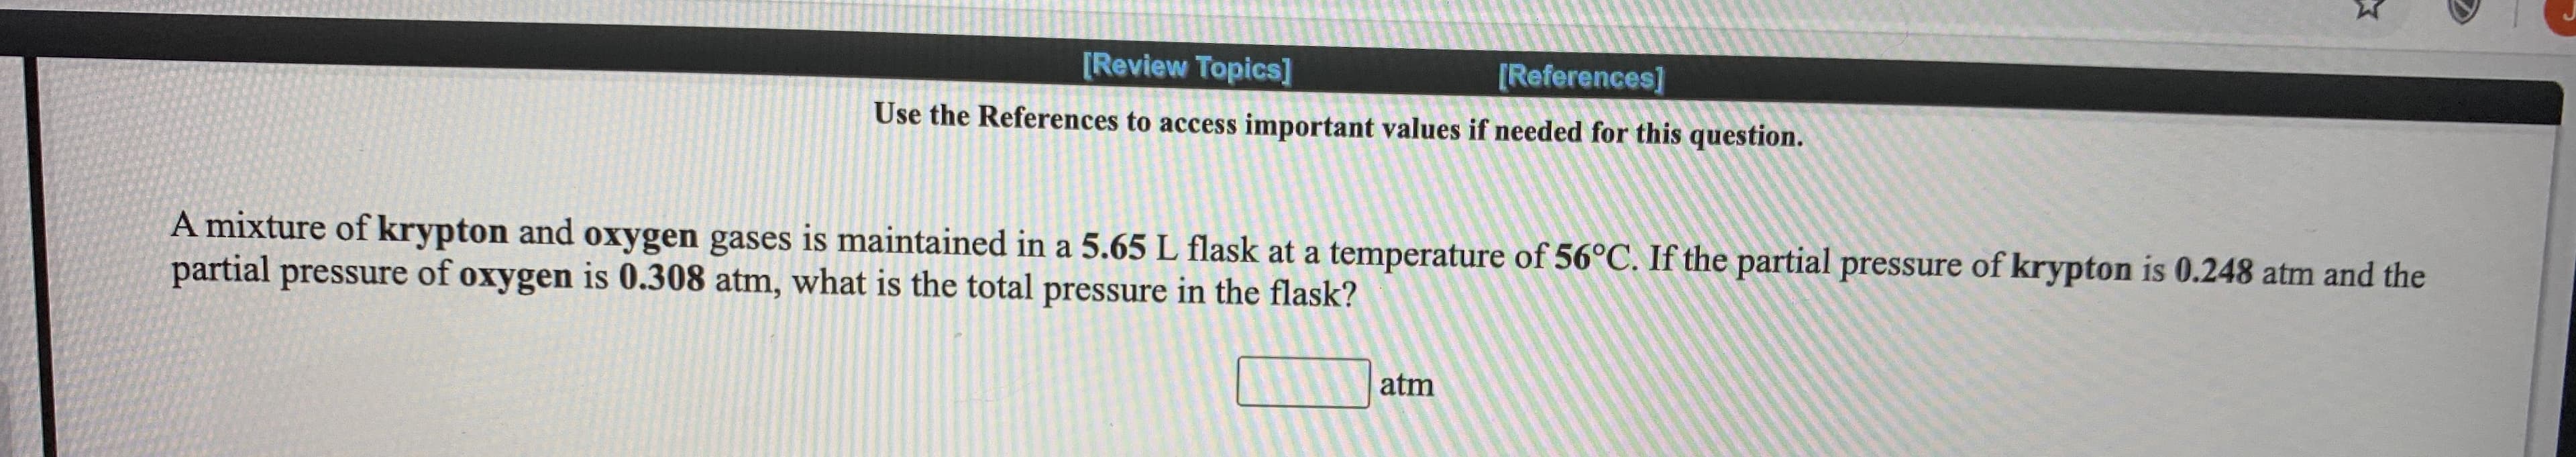 total pressure in the flask?
